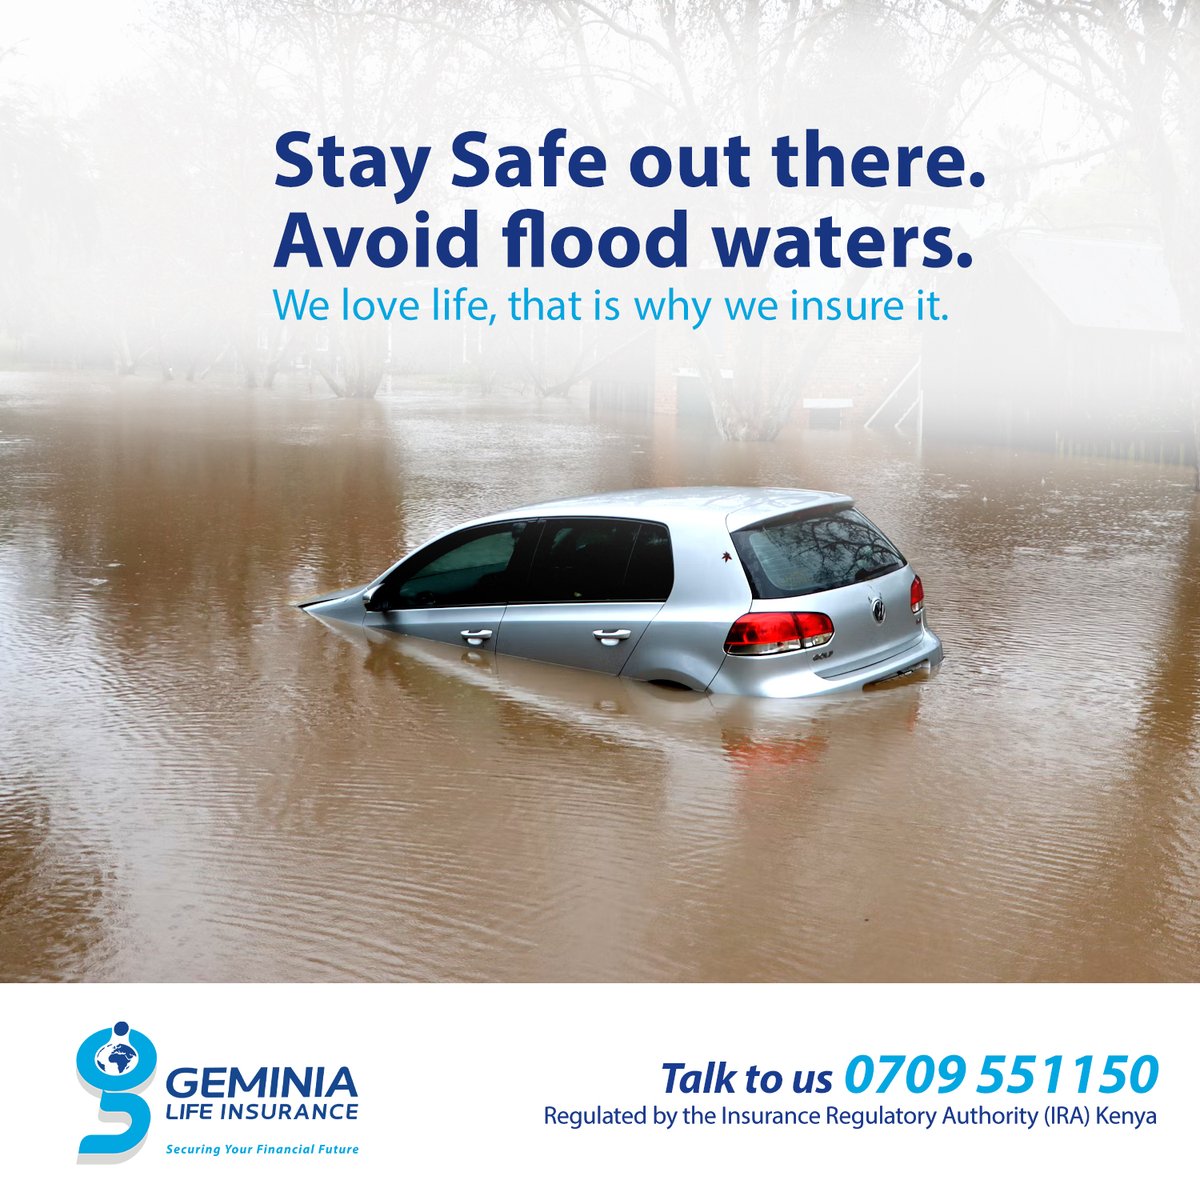 Urging everyone to prioritize safety as heavy rains persist in Kenya. Stay vigilant!

#flooding 
#lifeisprecious
#floodwatch